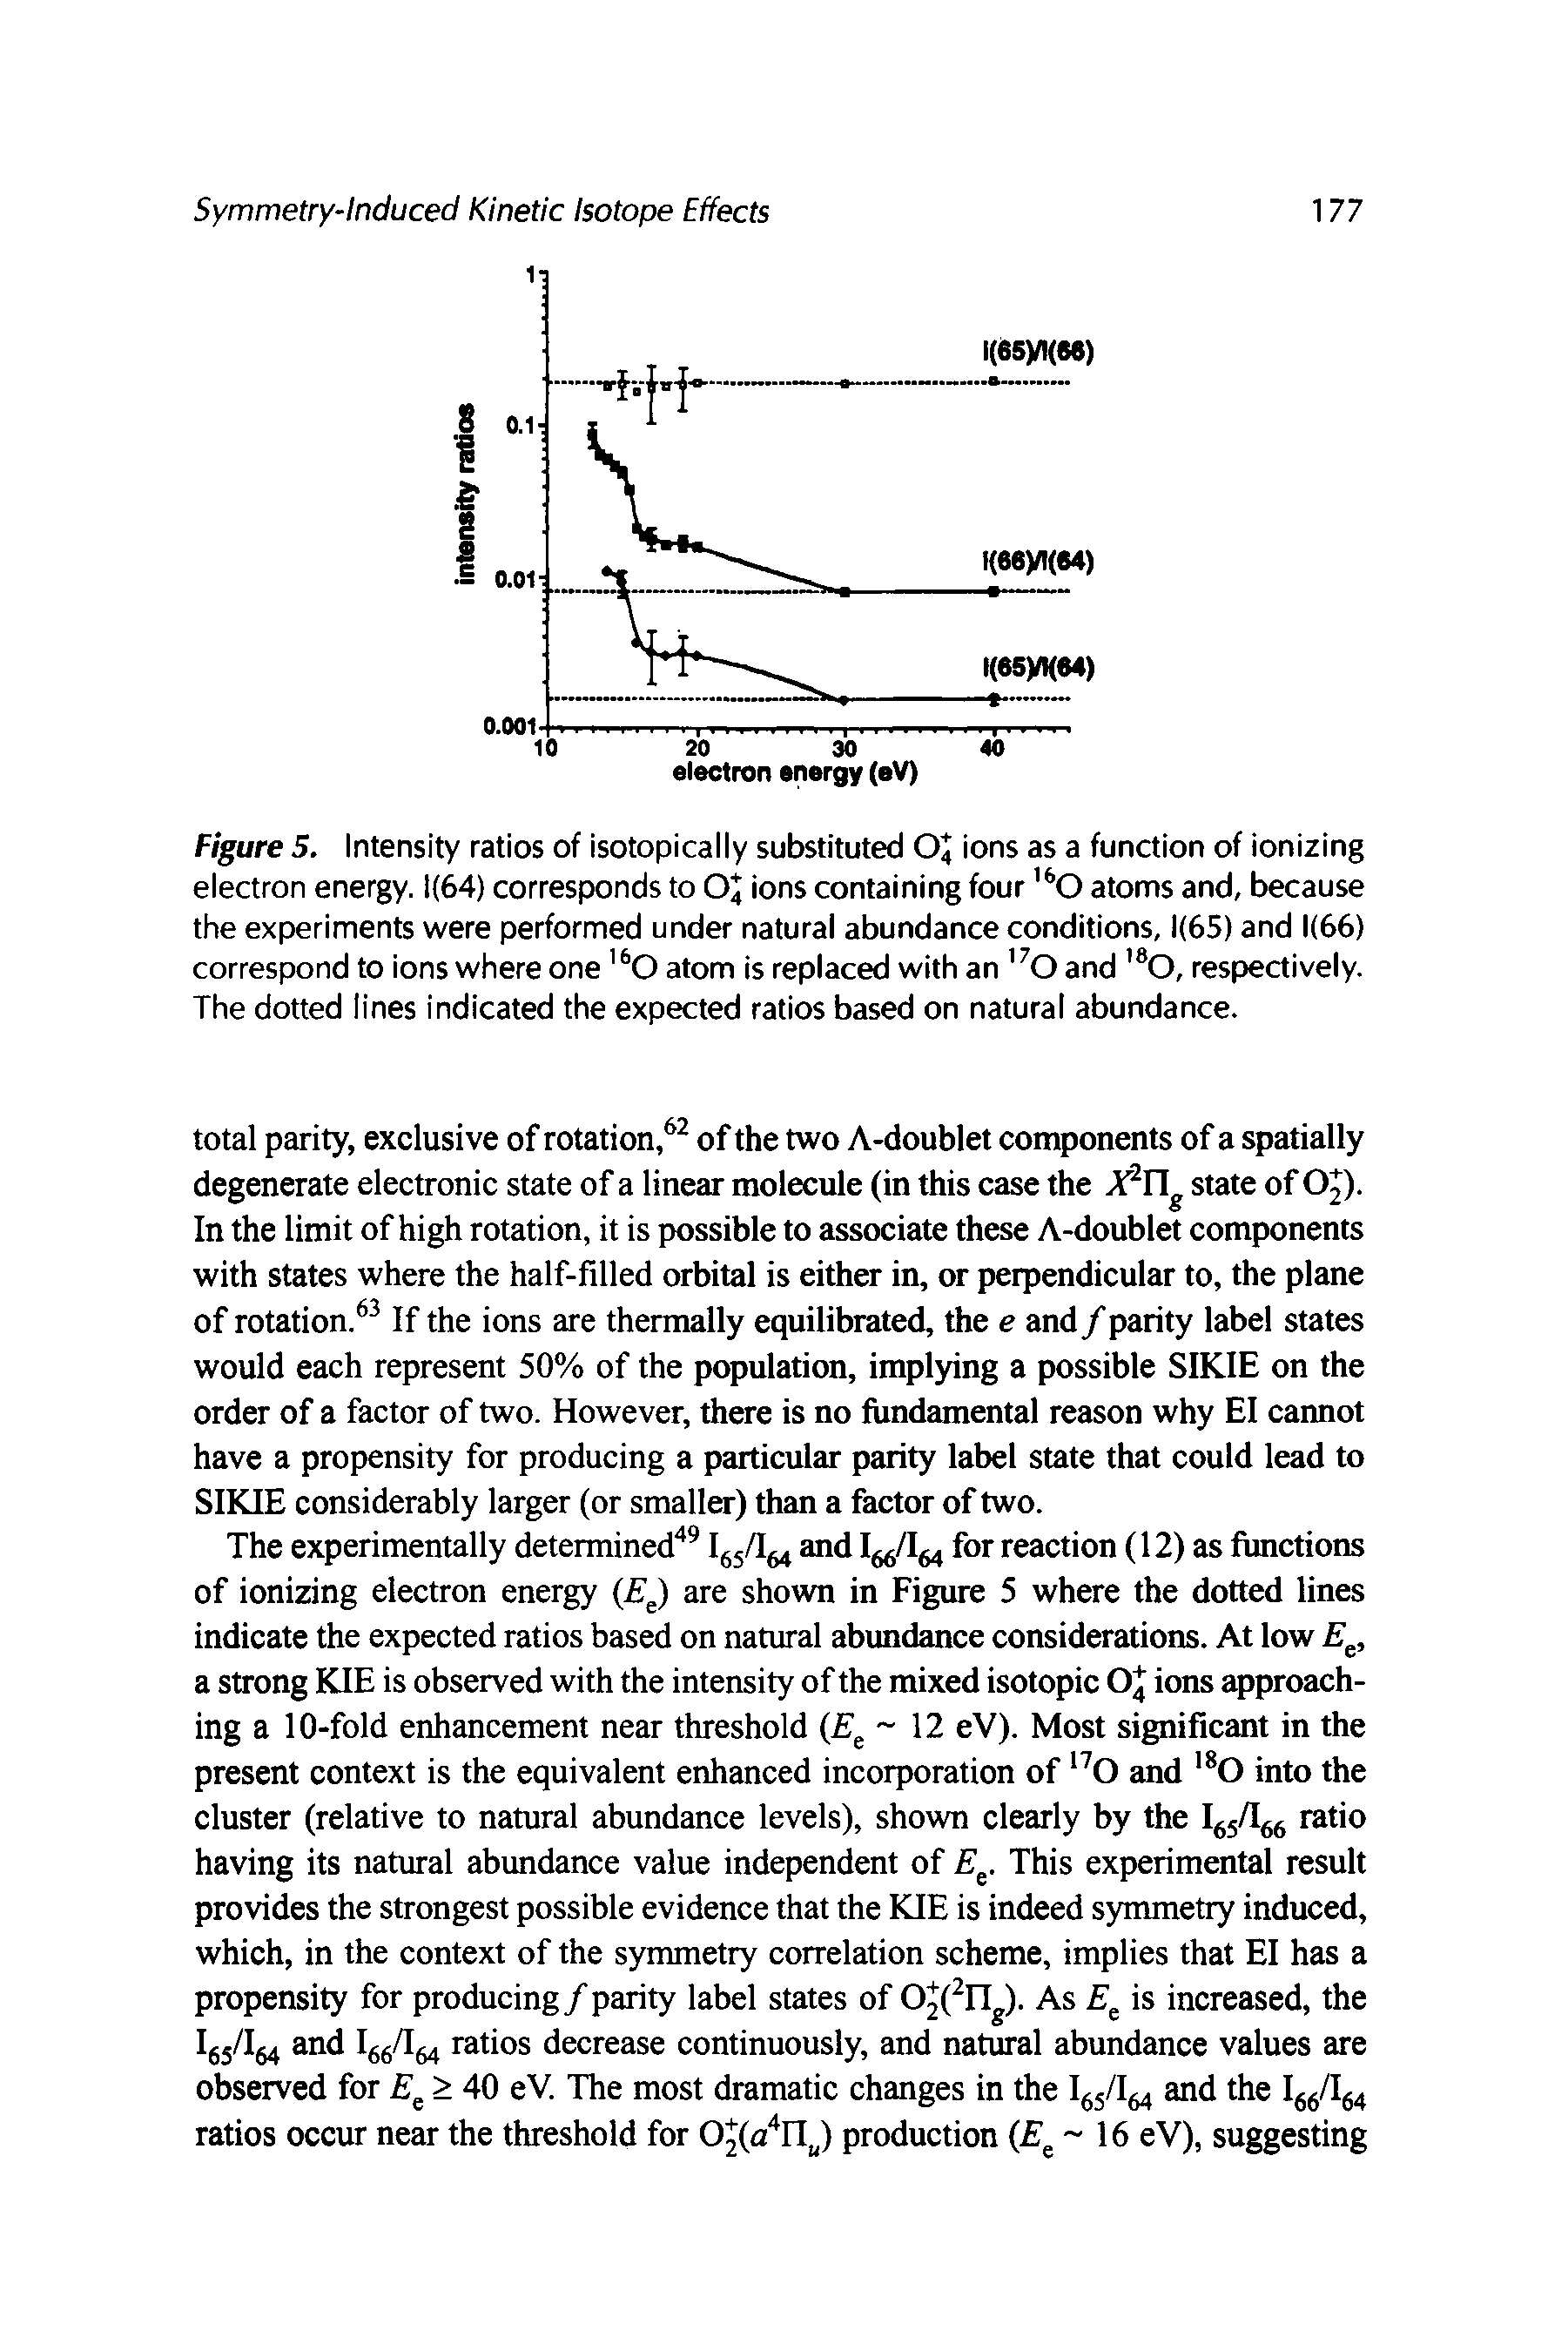 Figure 5. Intensity ratios of isotopically substituted O4 ions as a function of ionizing electron energy. 1(64) corresponds to O4 ions containing four O atoms and, because the experiments were performed under natural abundance conditions, 1(65) and 1(66) correspond to ions where one O atom is replaced with an O and 0, respectively. The dotted lines indicated the expected ratios based on natural abundance.